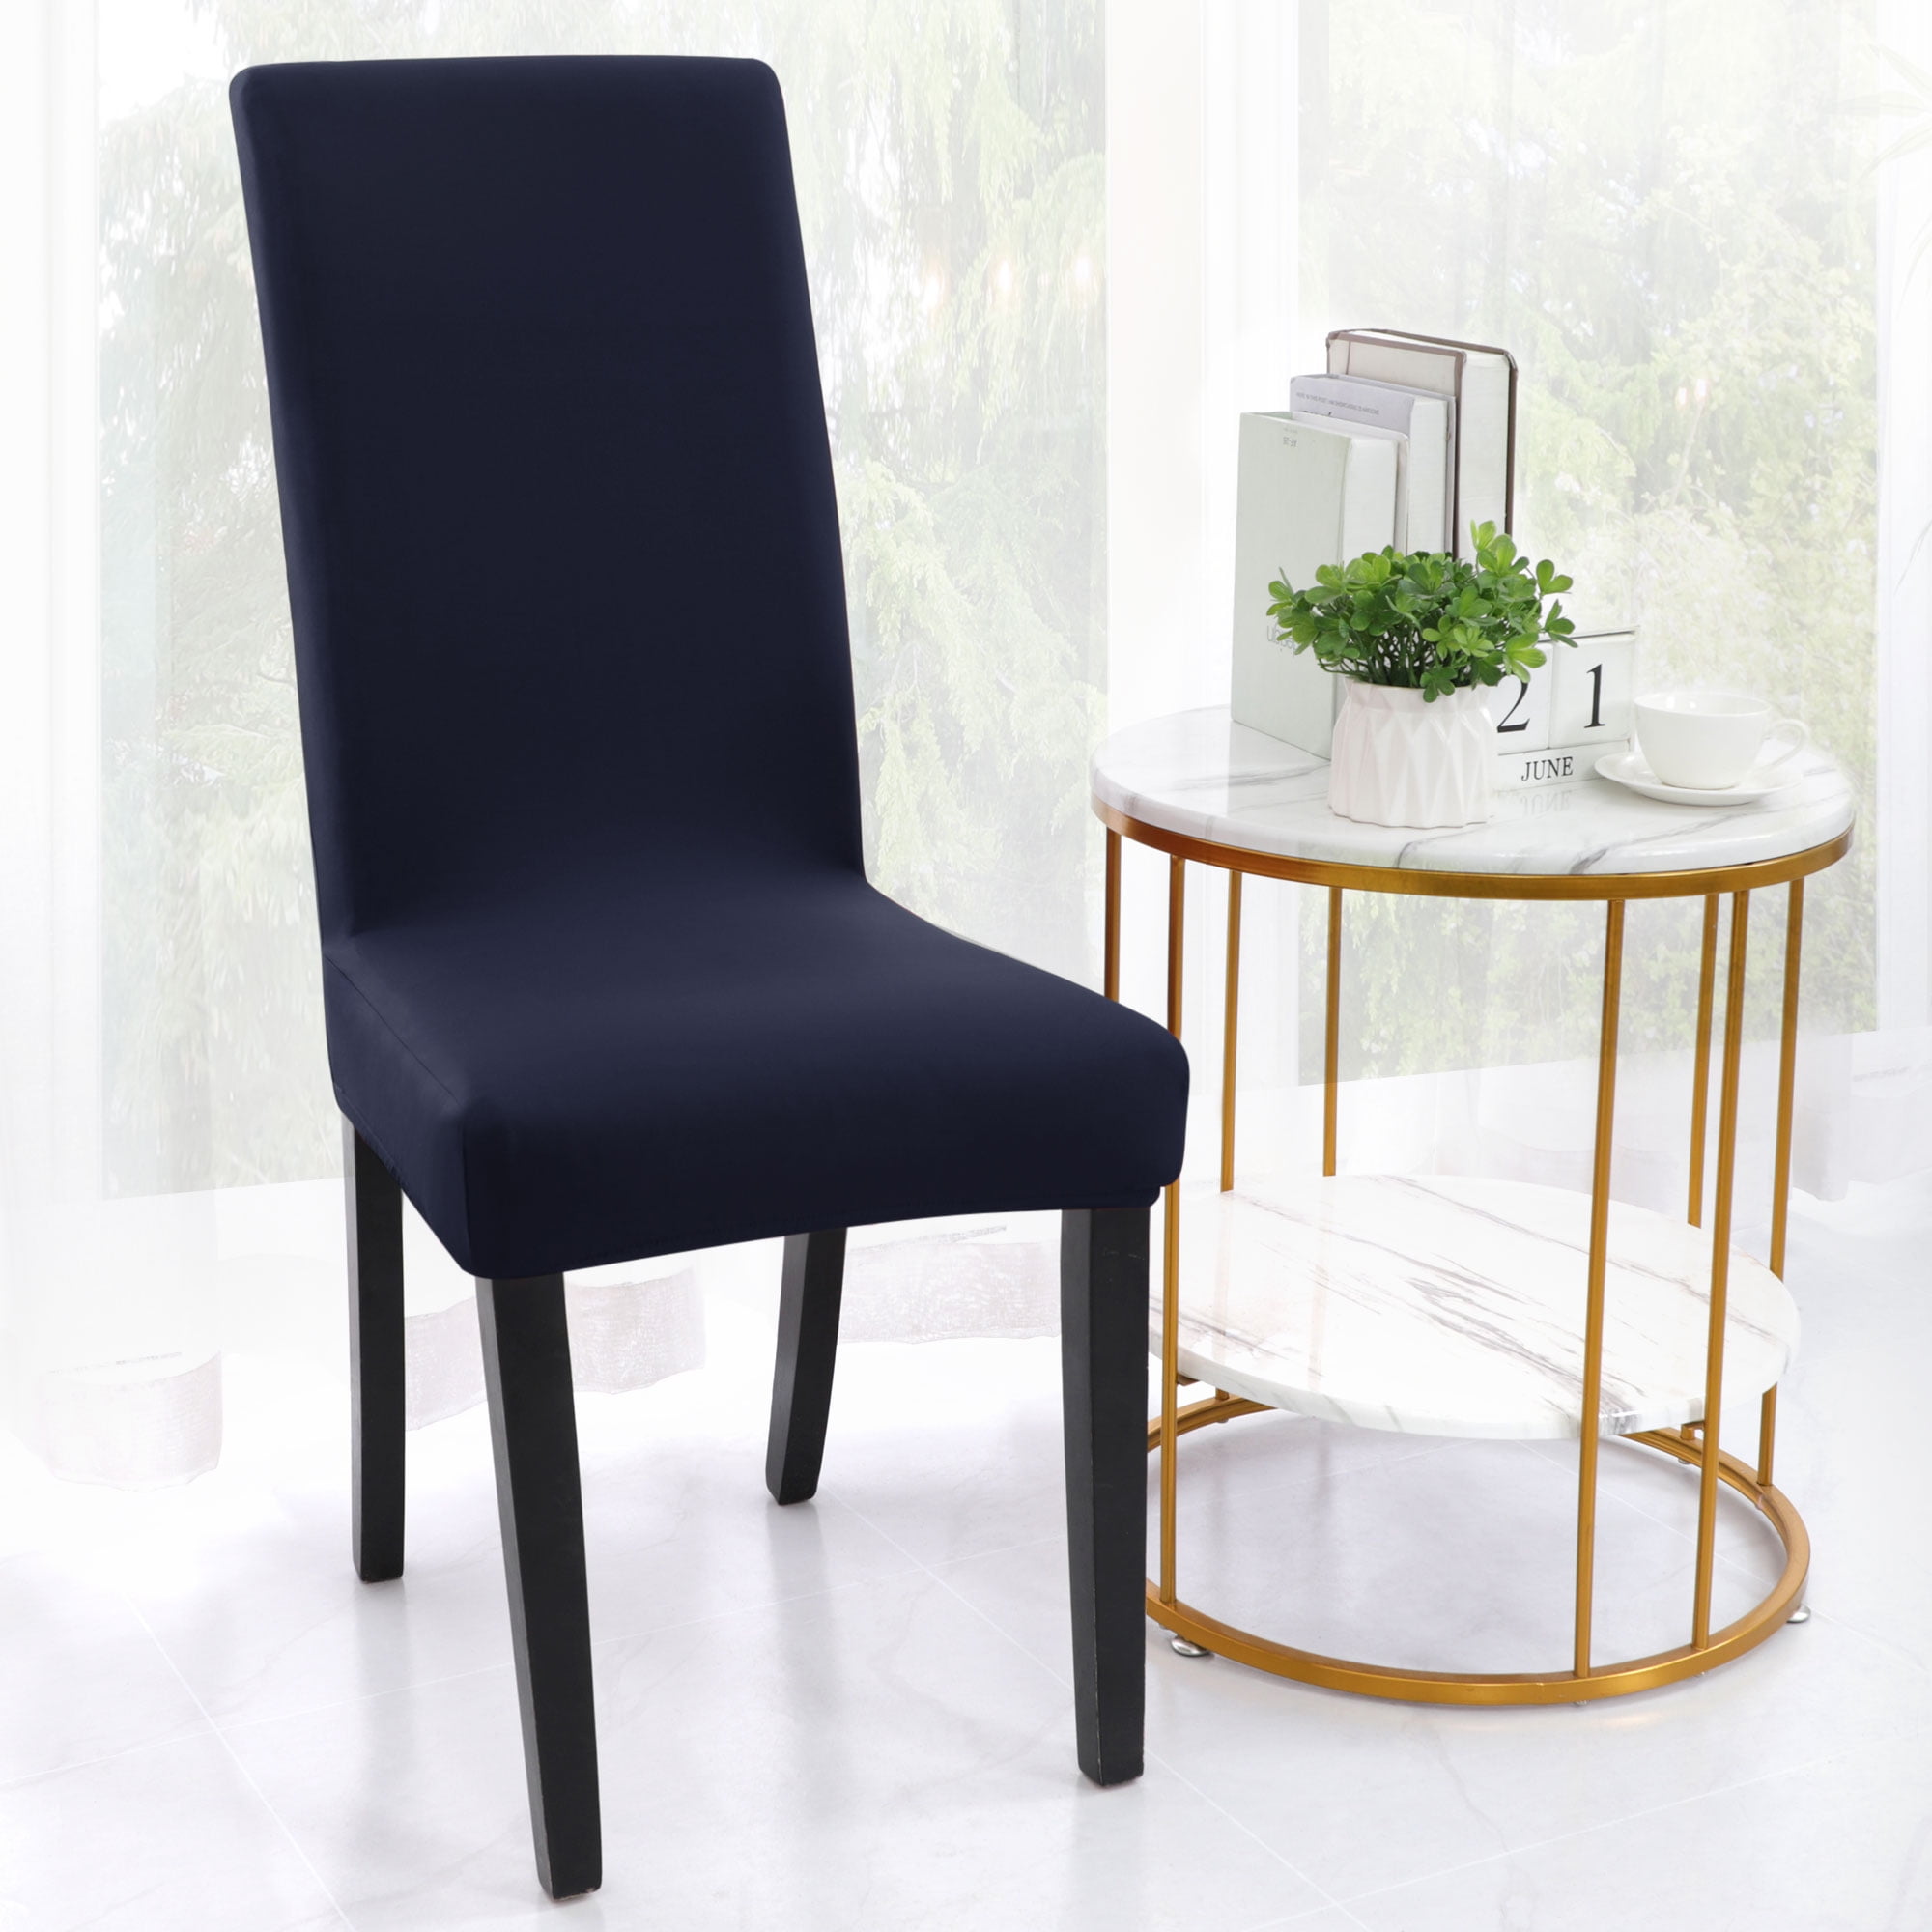 Details about   1/2/4pcs Slipcovers Spandex Stretch Dining Chair Covers Seat Cushion Protectors 